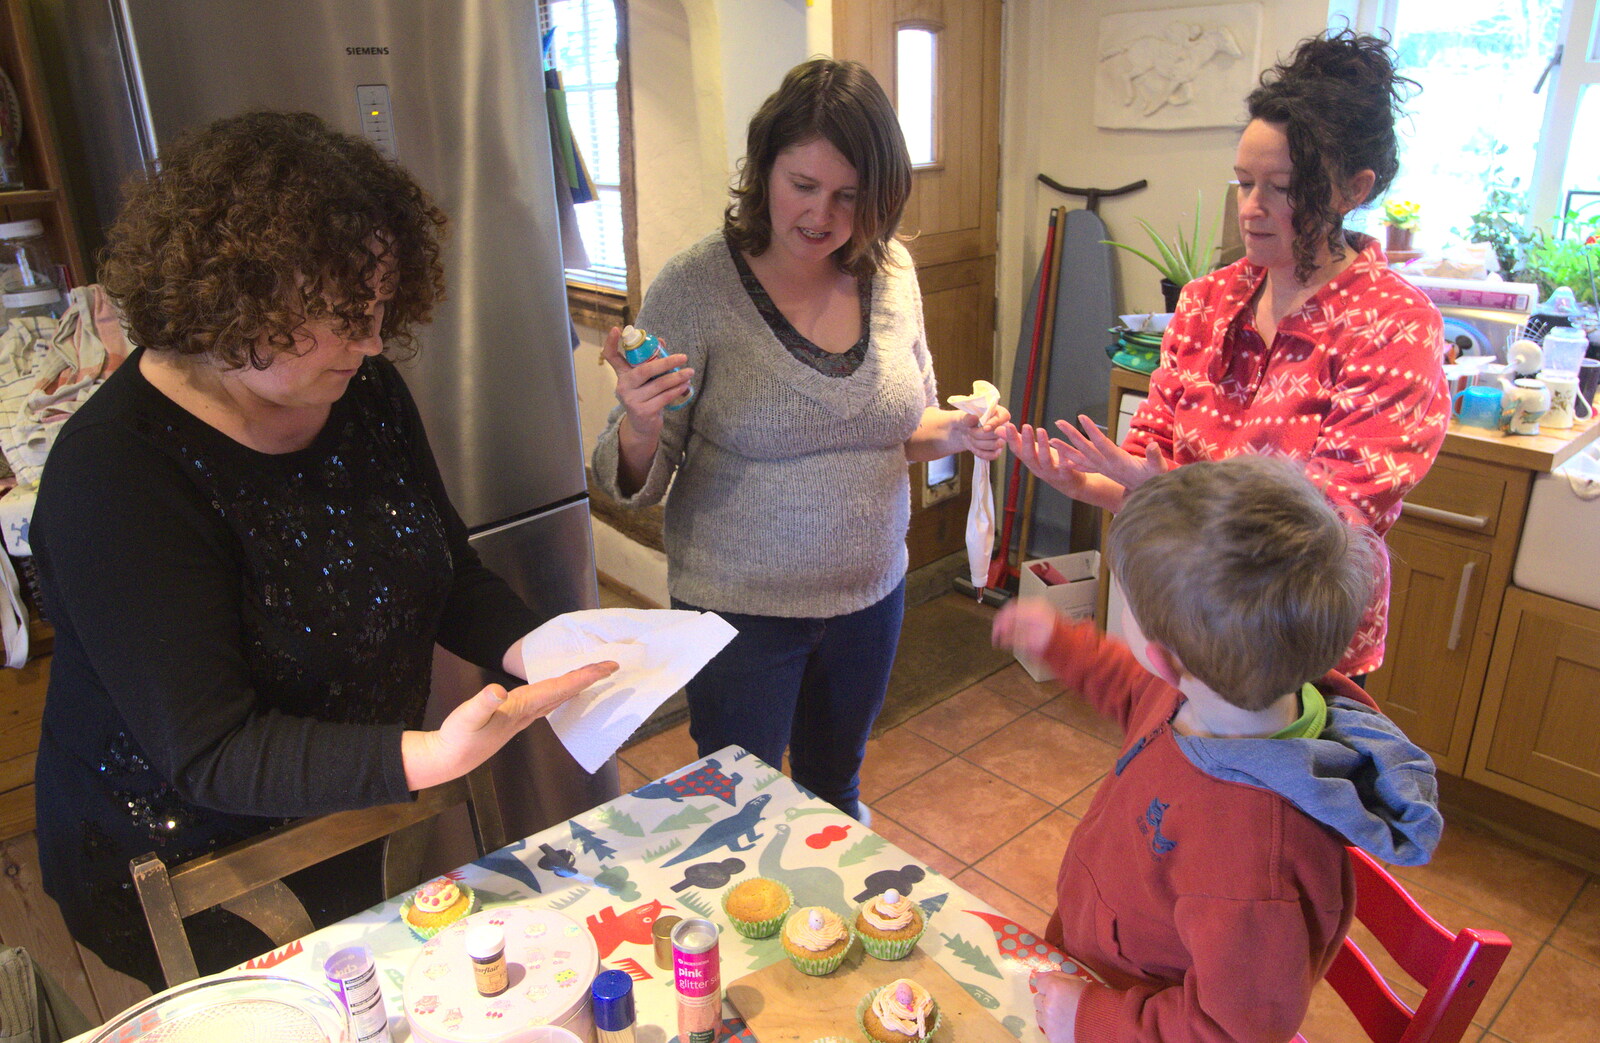 There's some cake decorating going on from An Easter Visit from Da Gorls, Brome, Suffolk - 2nd April 2013